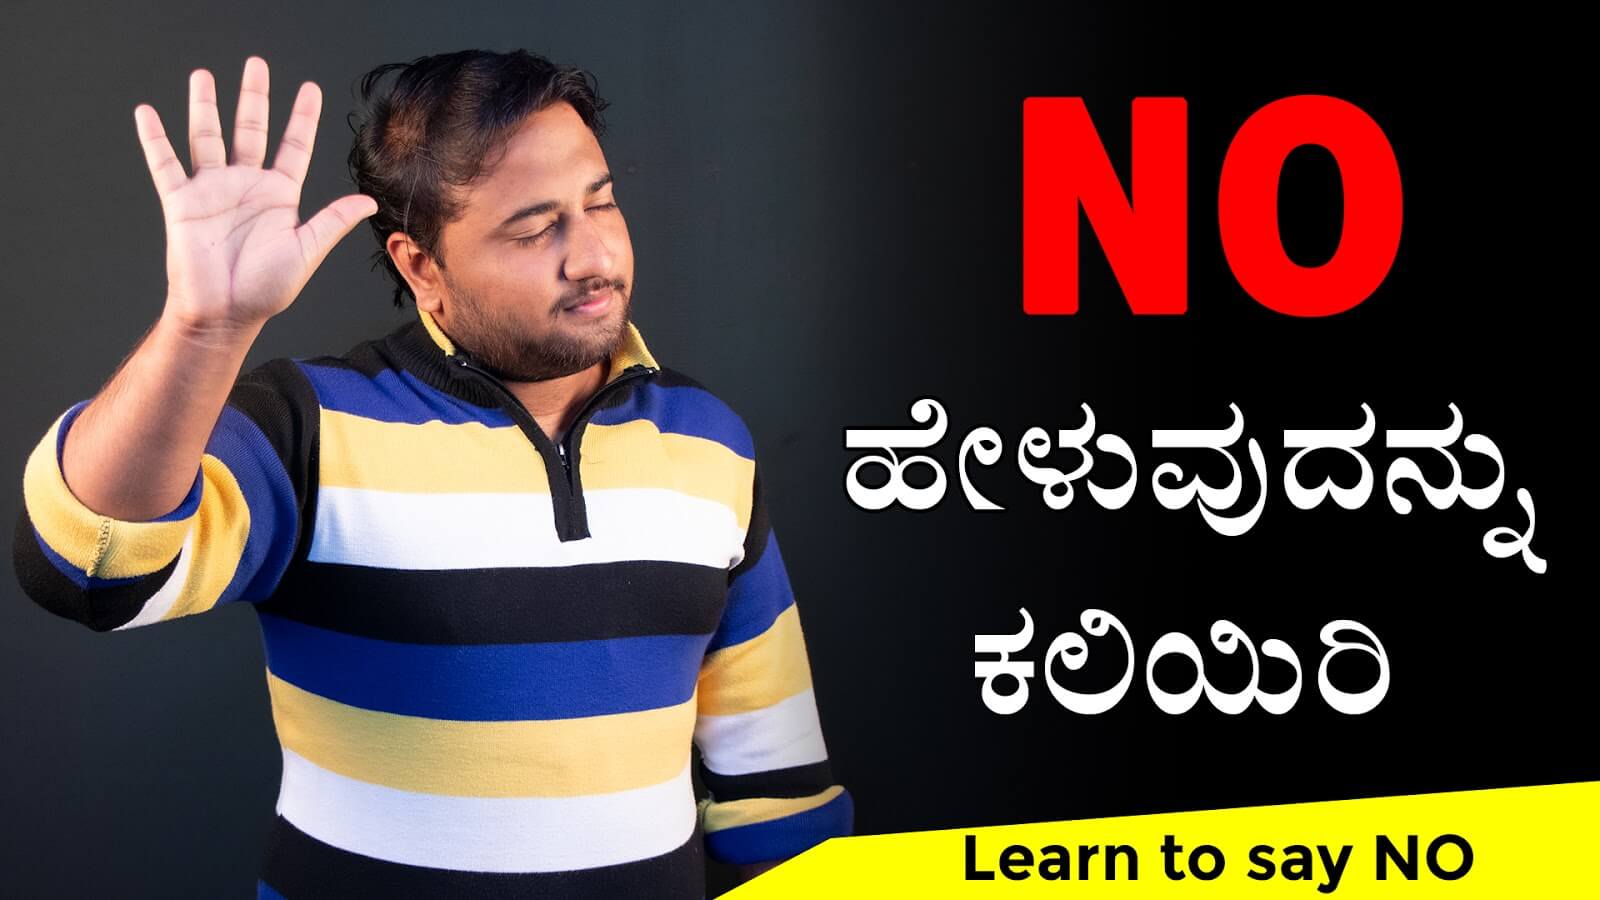 You are currently viewing NO ಹೇಳುವುದನ್ನು ಕಲಿಯಿರಿ : Learn to say NO in Kannada – Kannada Motivational Article